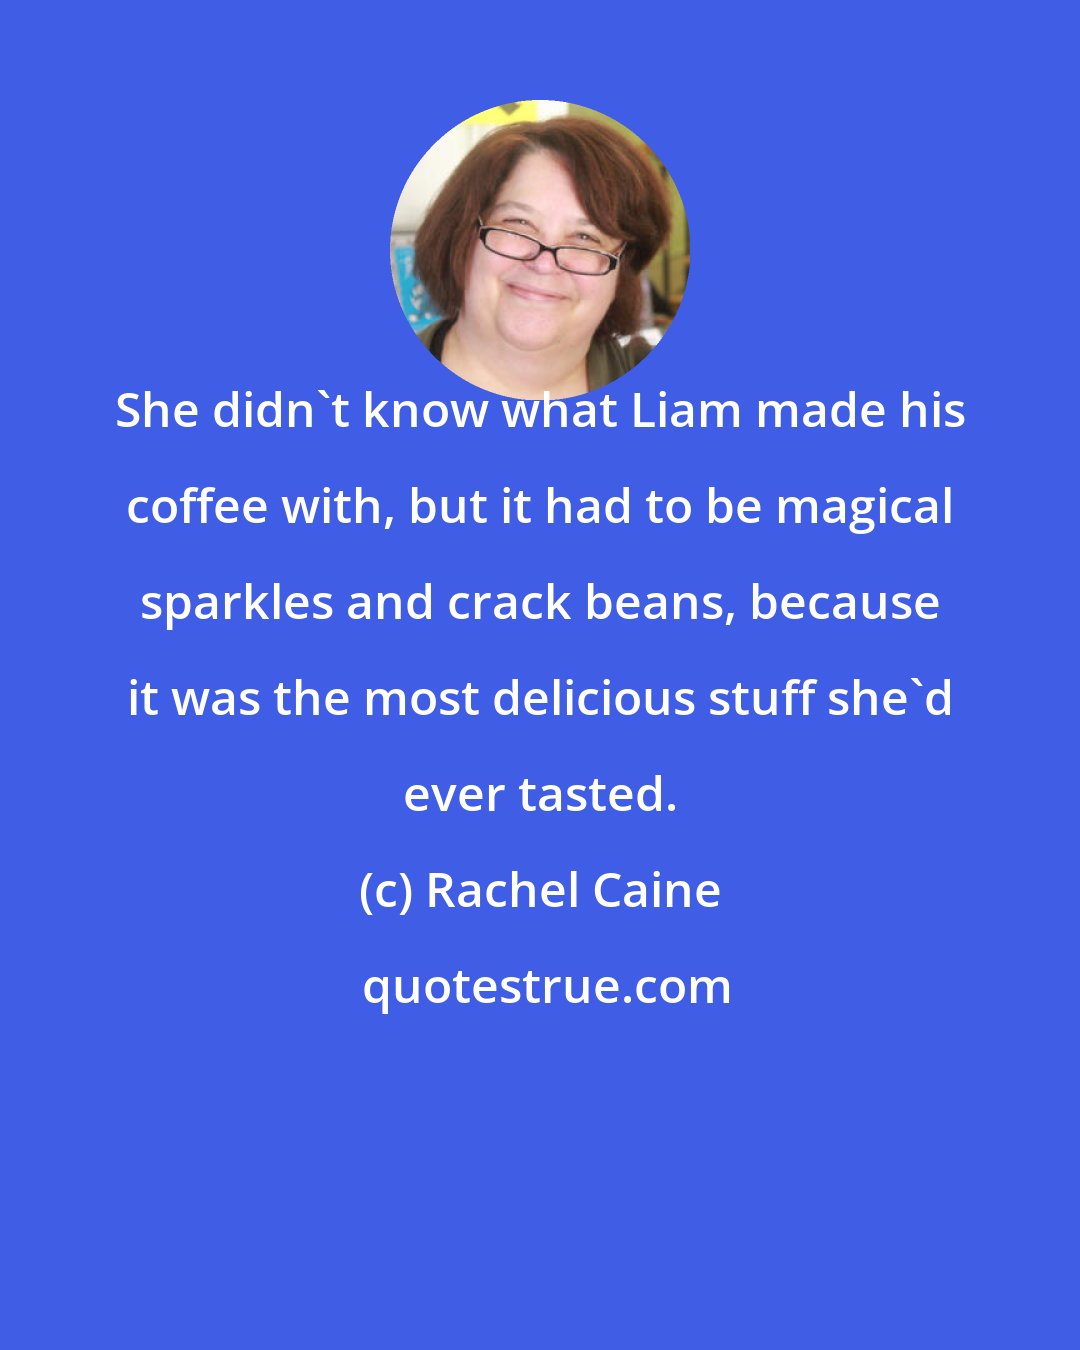 Rachel Caine: She didn't know what Liam made his coffee with, but it had to be magical sparkles and crack beans, because it was the most delicious stuff she'd ever tasted.